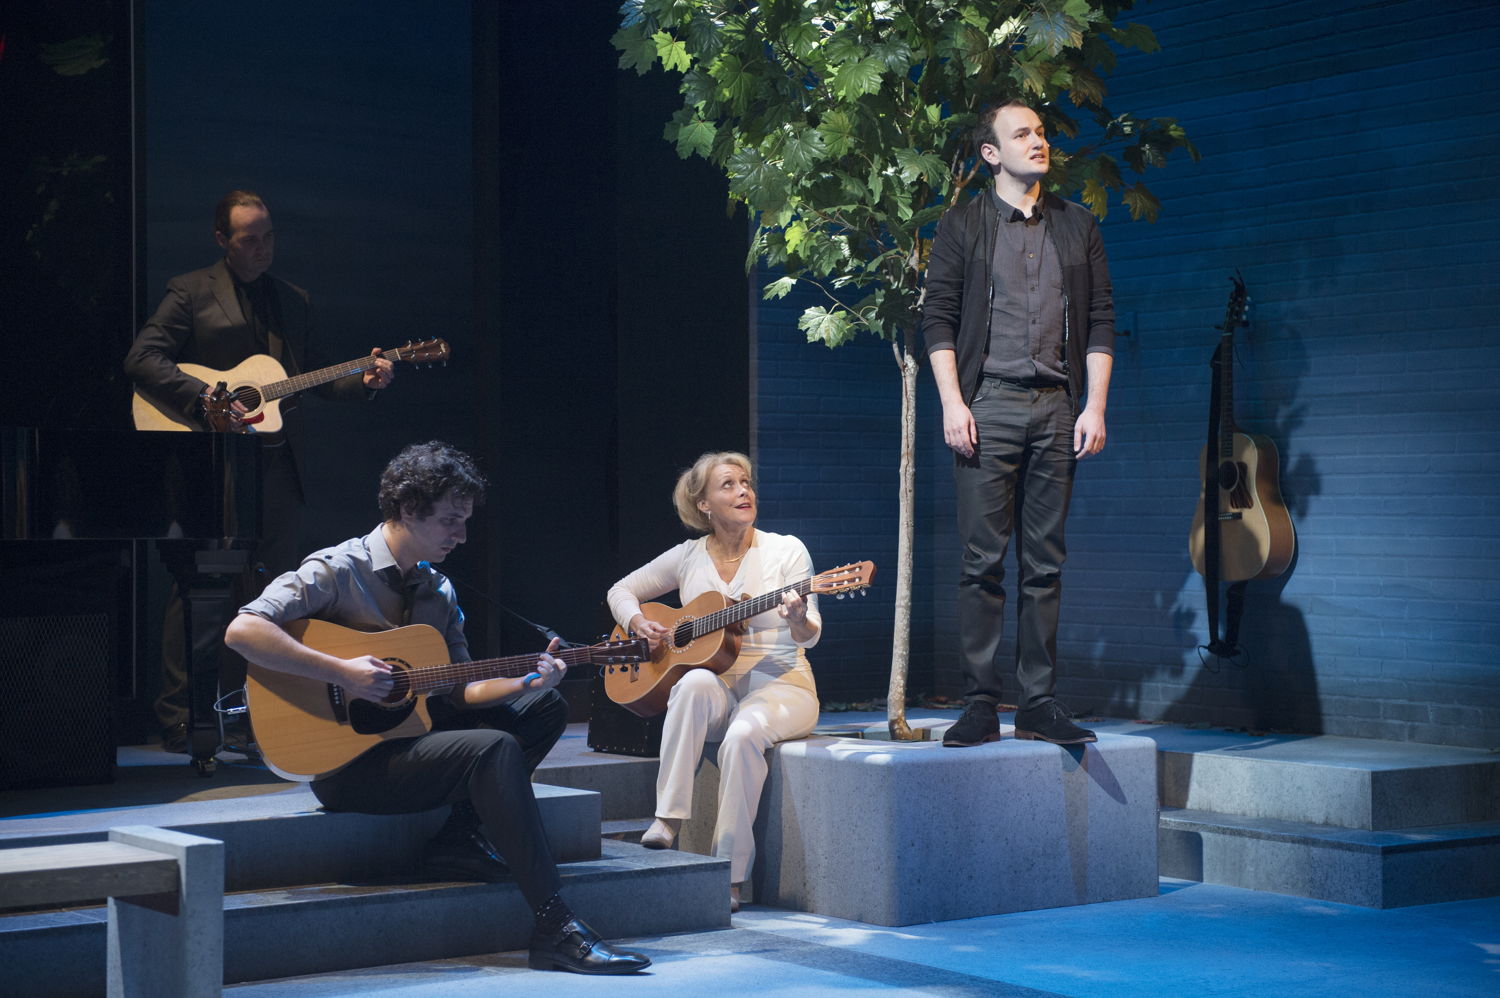 Brent Jarvis, Jonathan Gould, Linda Kidder and Anton Lipovetsky in I Think I’m Fallin’ - The Songs of Joni Mitchell created by Michael Shamata and Tobin Stokes / Photos by David Cooper
